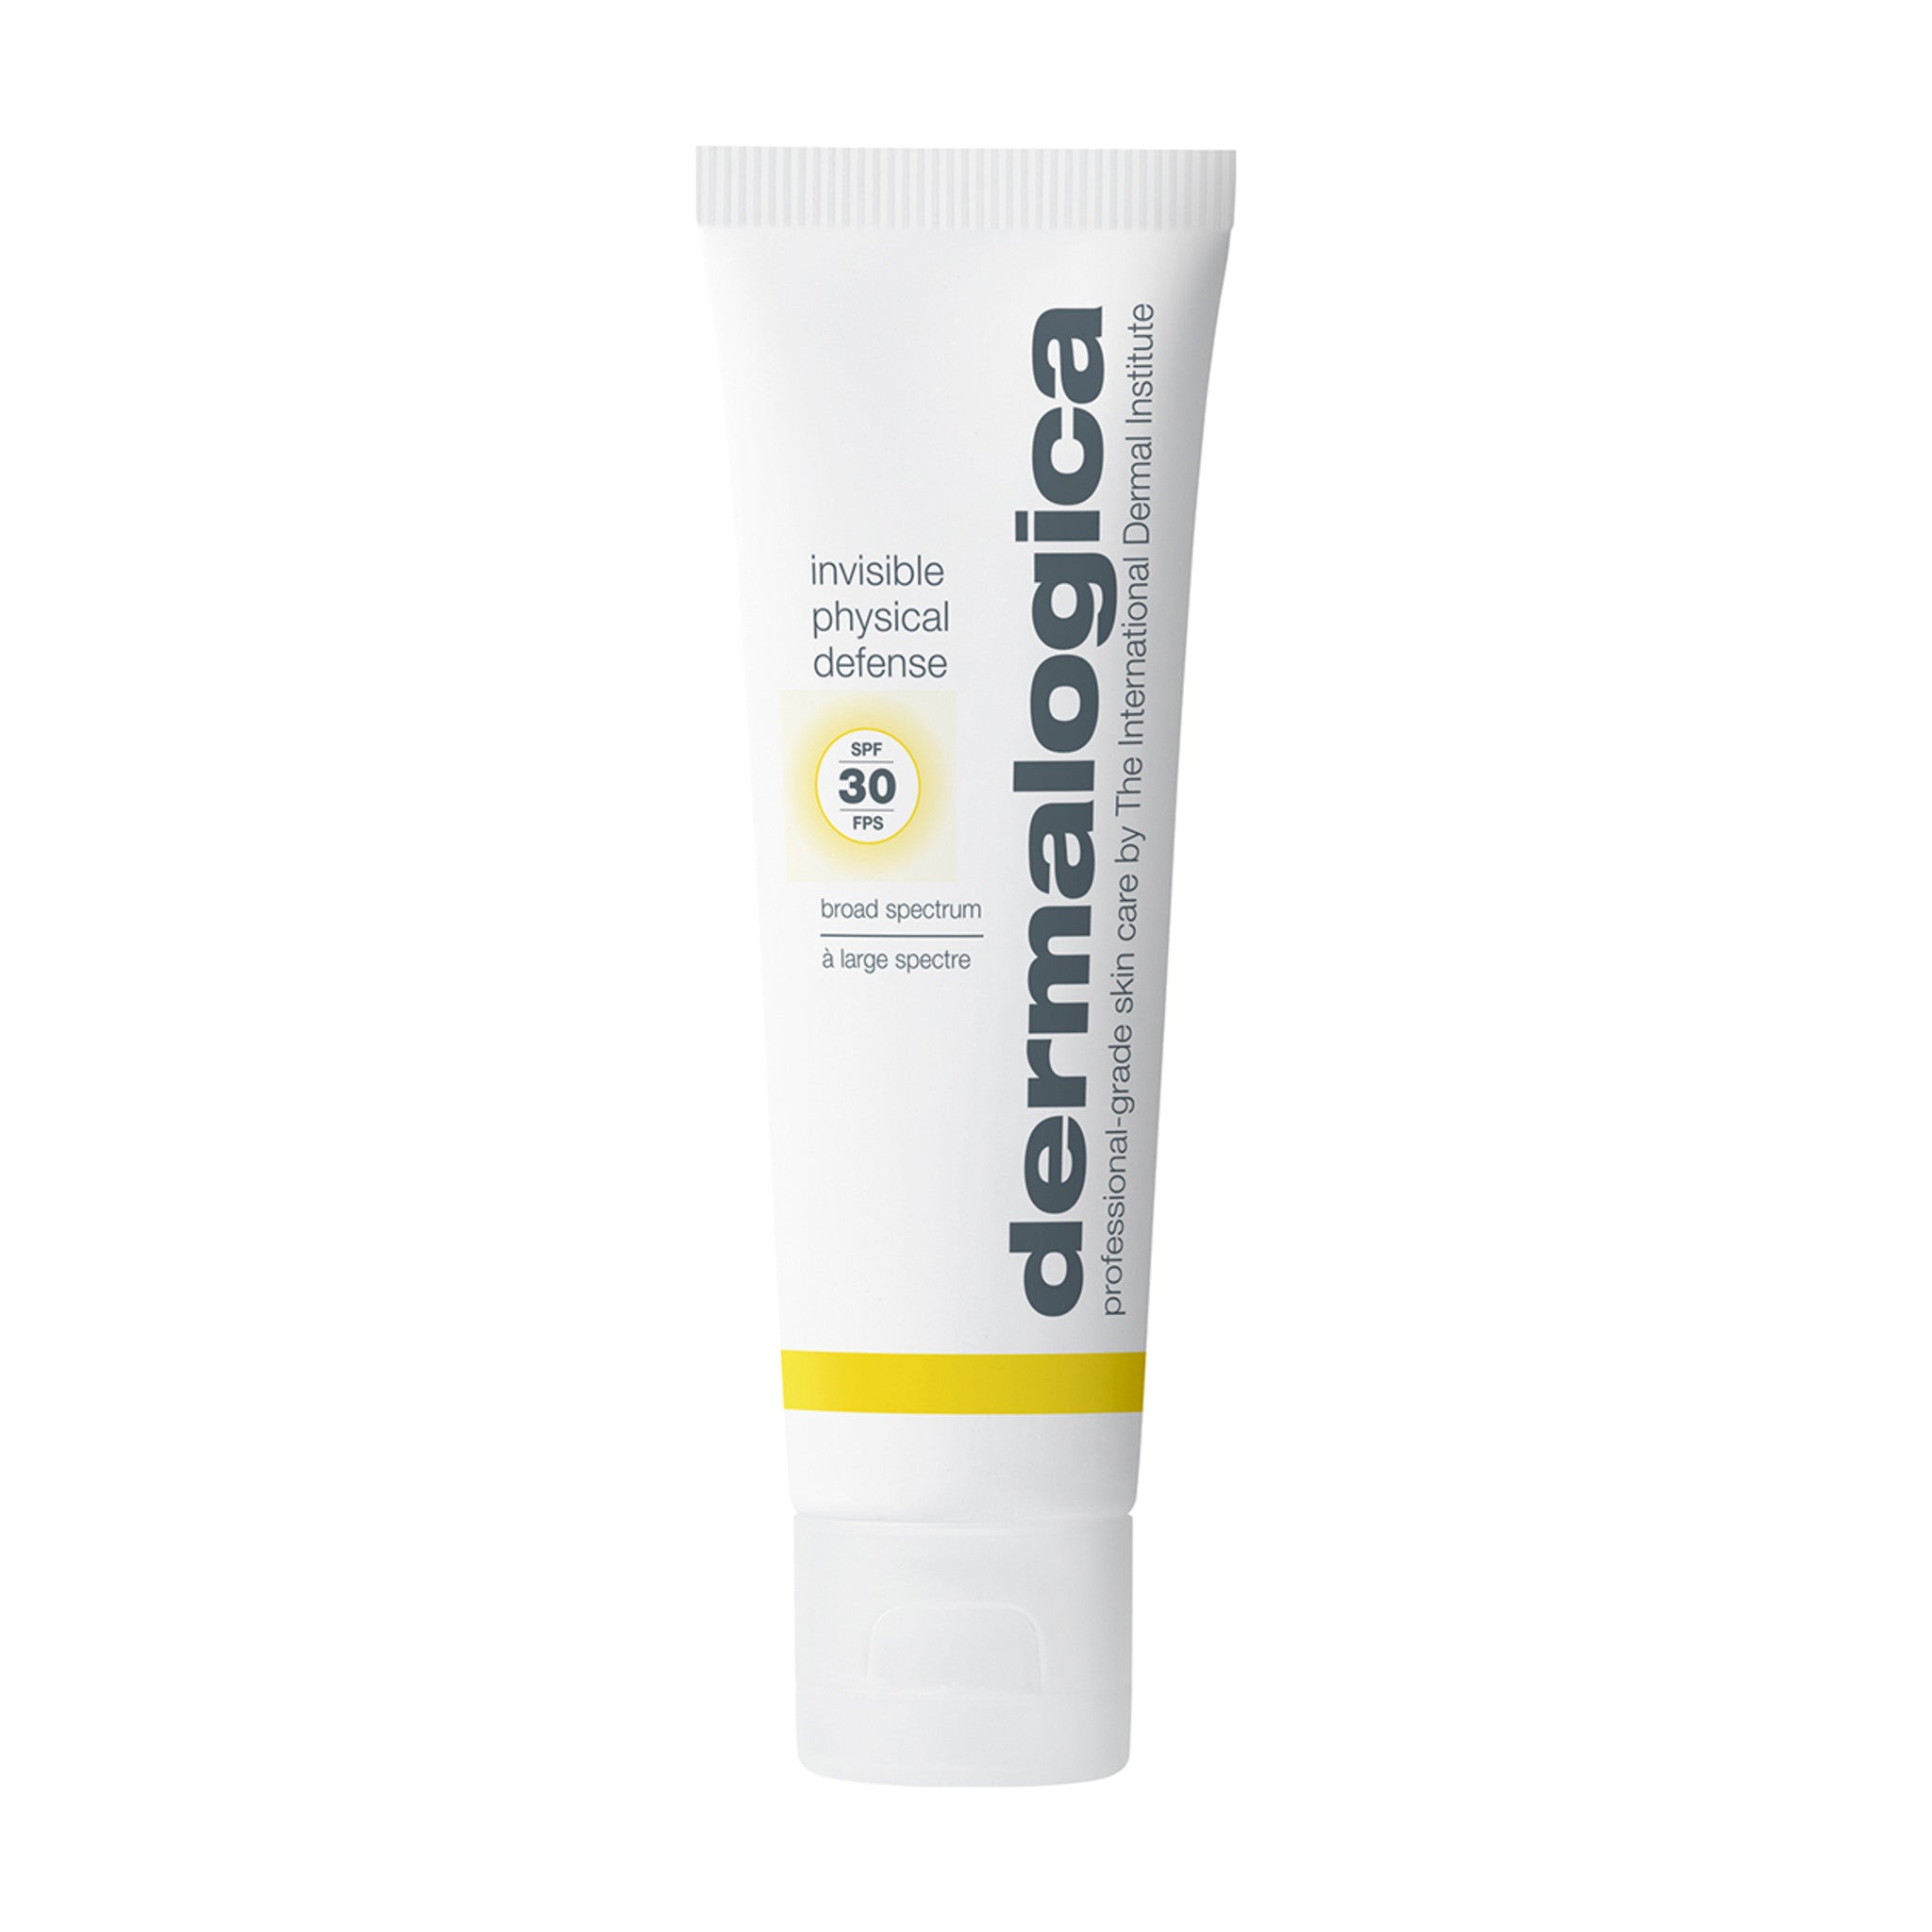 Dermalogica Invisible Physical Defense SPF 30 main image.